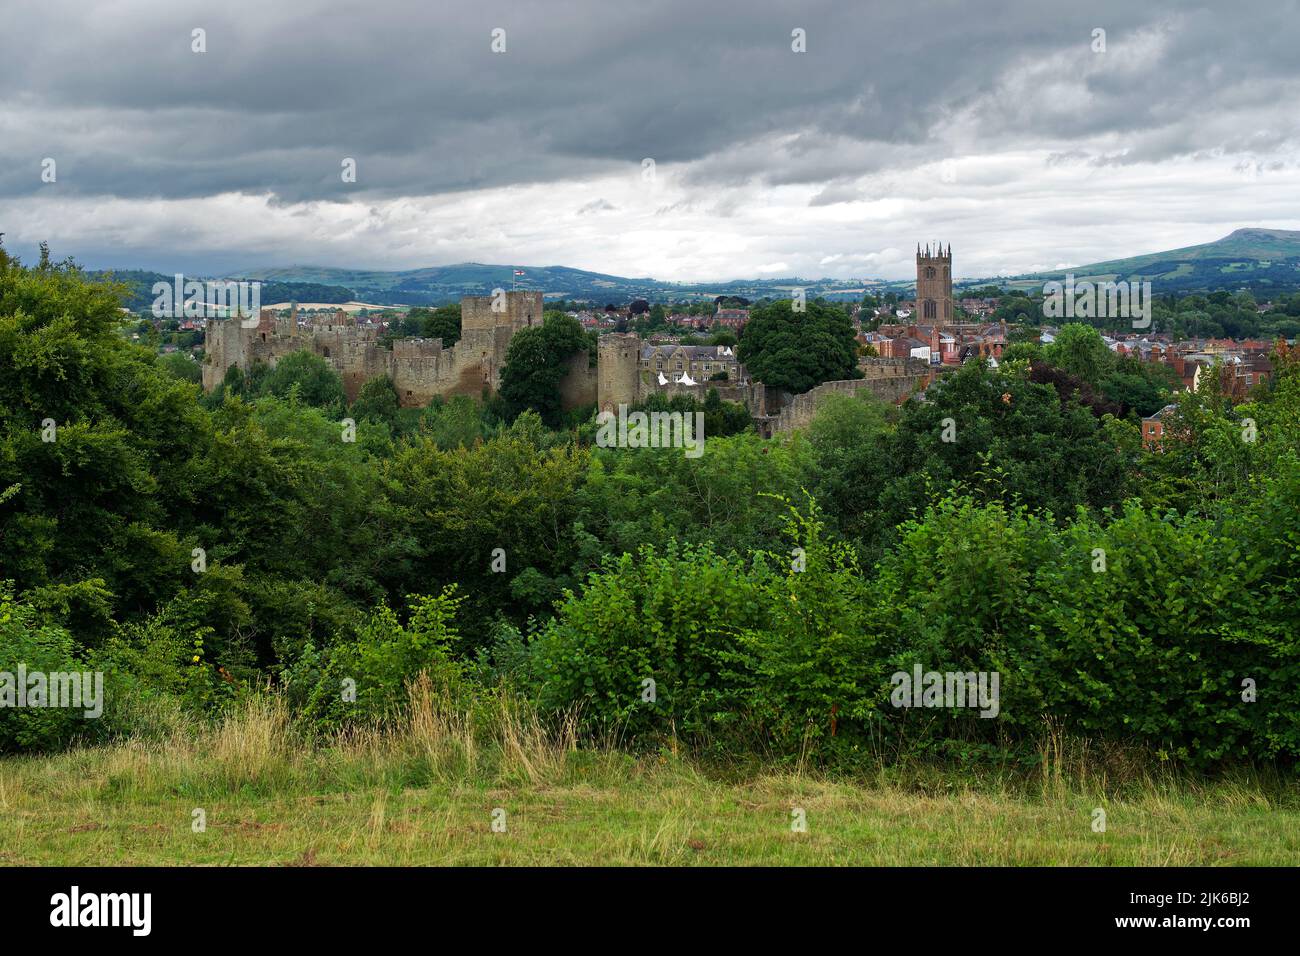 Ludlow Castle is a medieval fortification in the town of Ludlow in Shropshire. It was probably founded by Walter de Lacy around 1075. Stock Photo